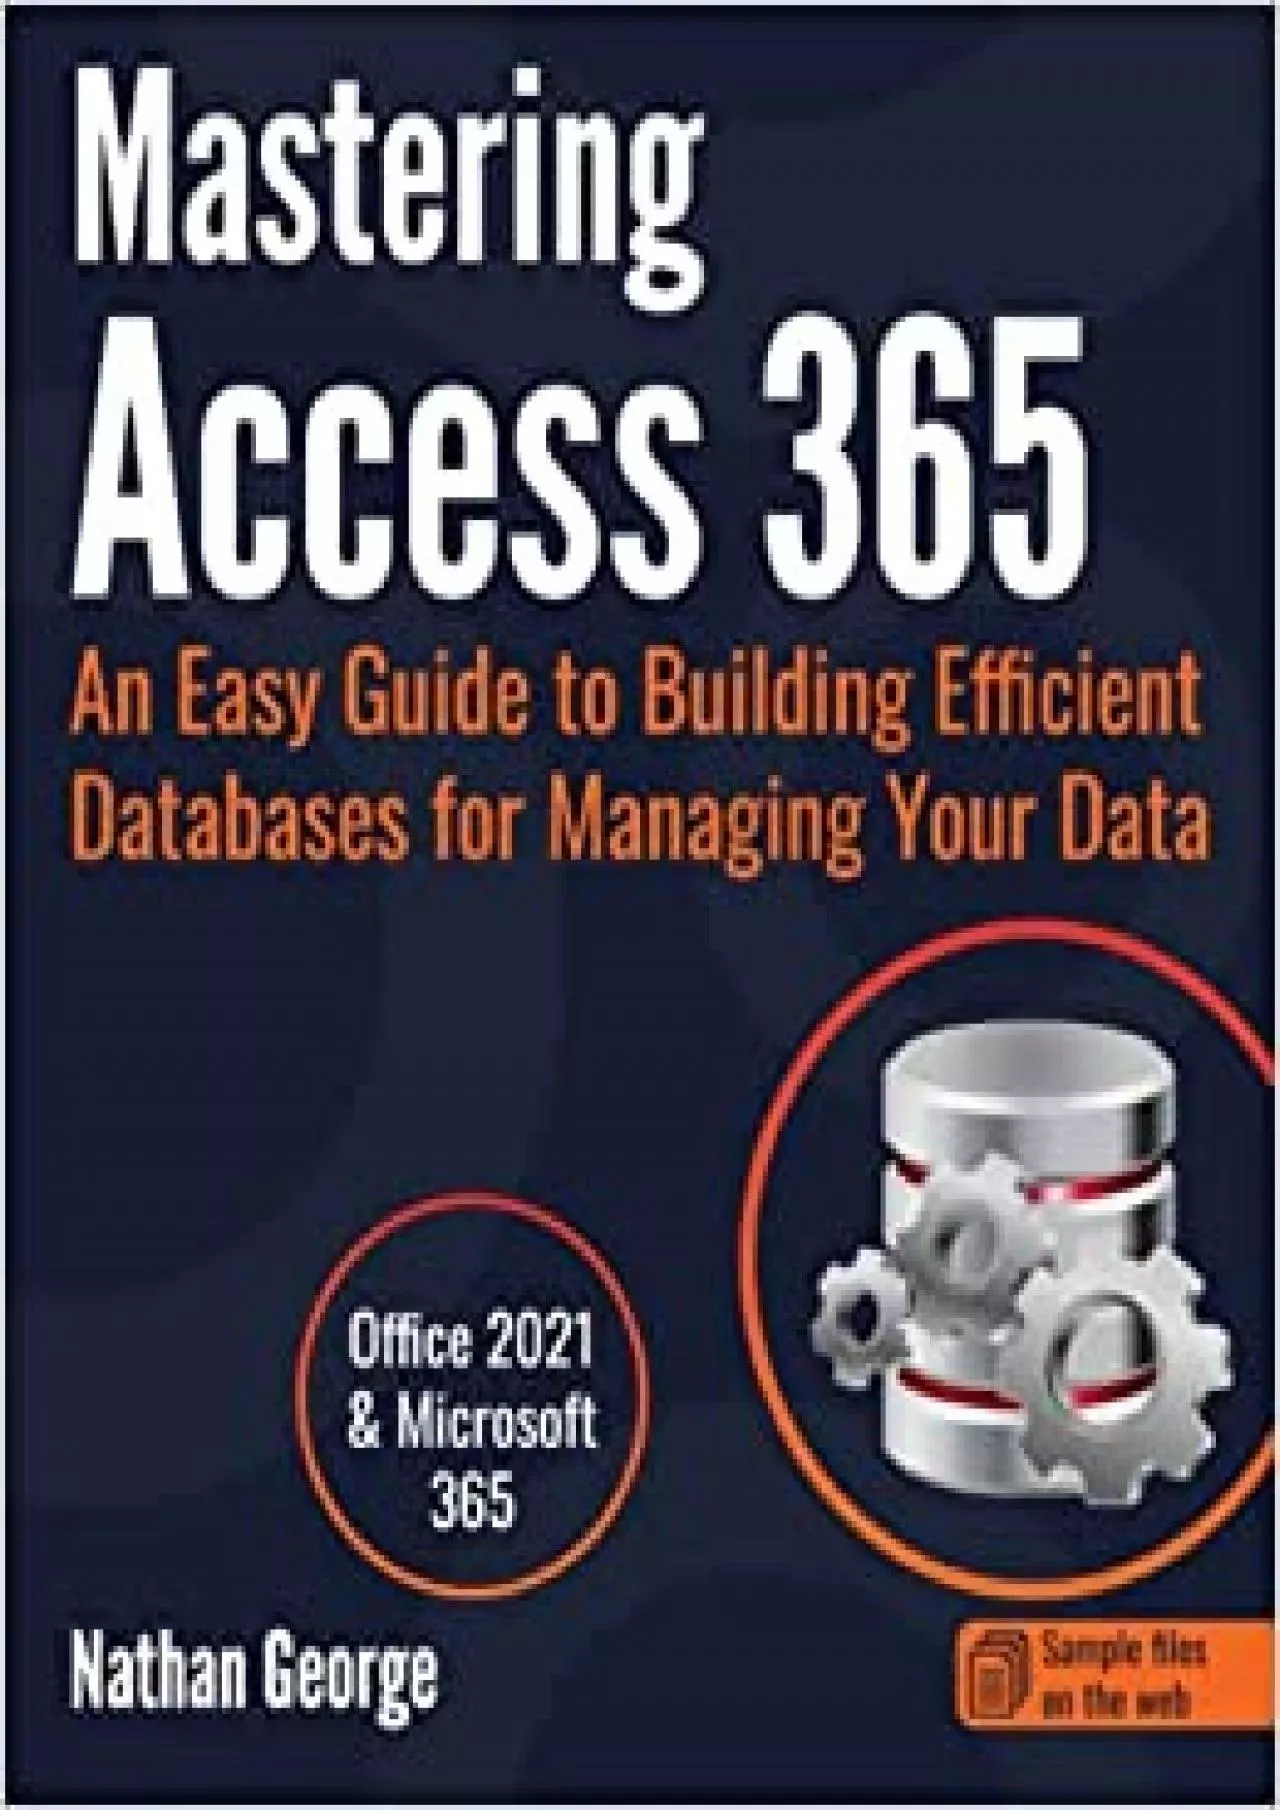 Mastering Access 365: An Easy Guide to Building Efficient Databases for Managing Your